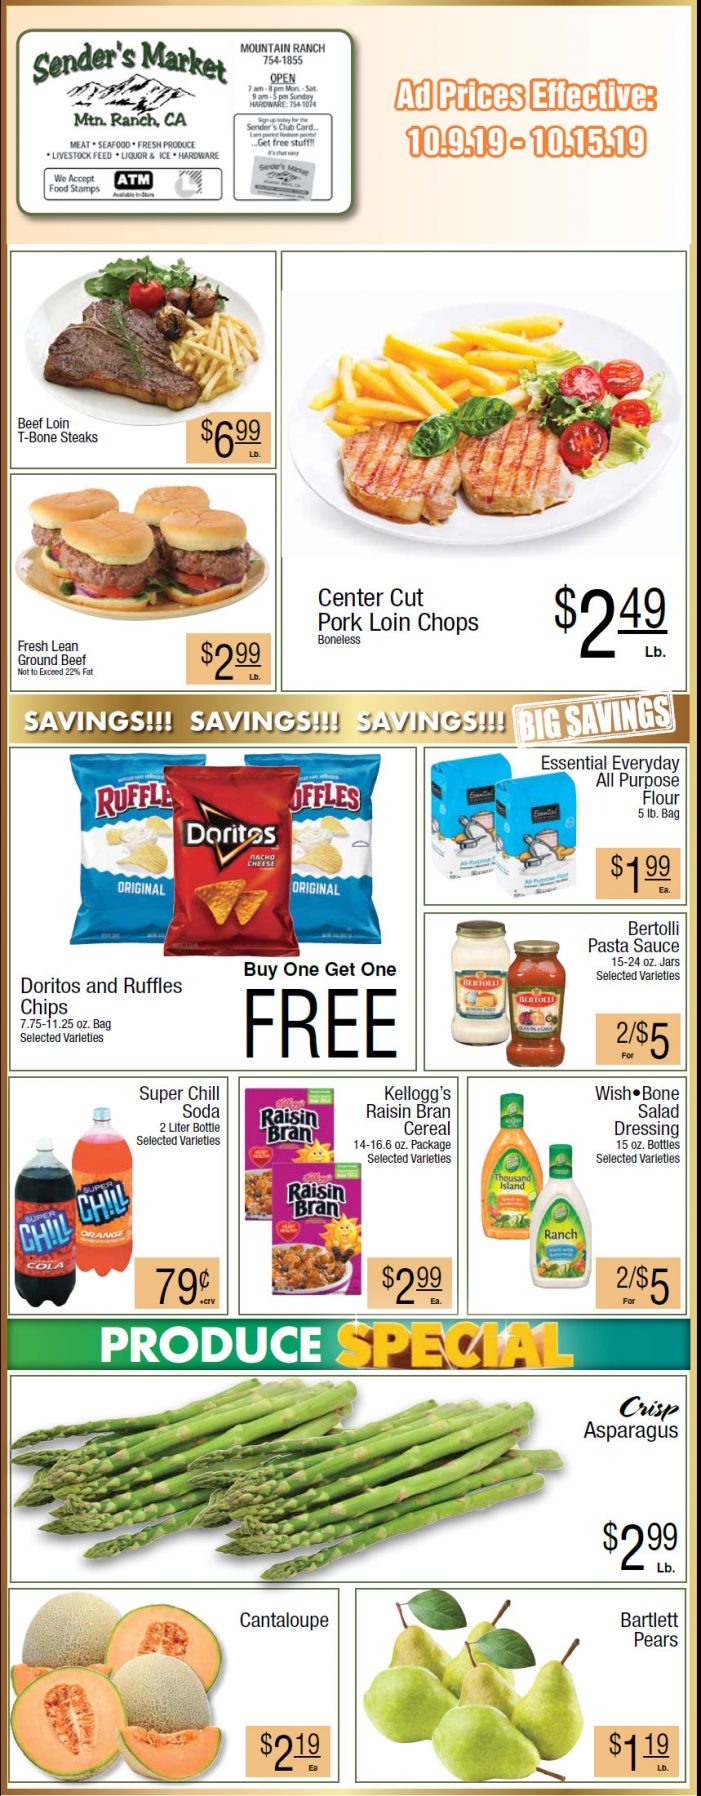 Sender’s Market Weekly Ad & Grocery Specials Through October 15th